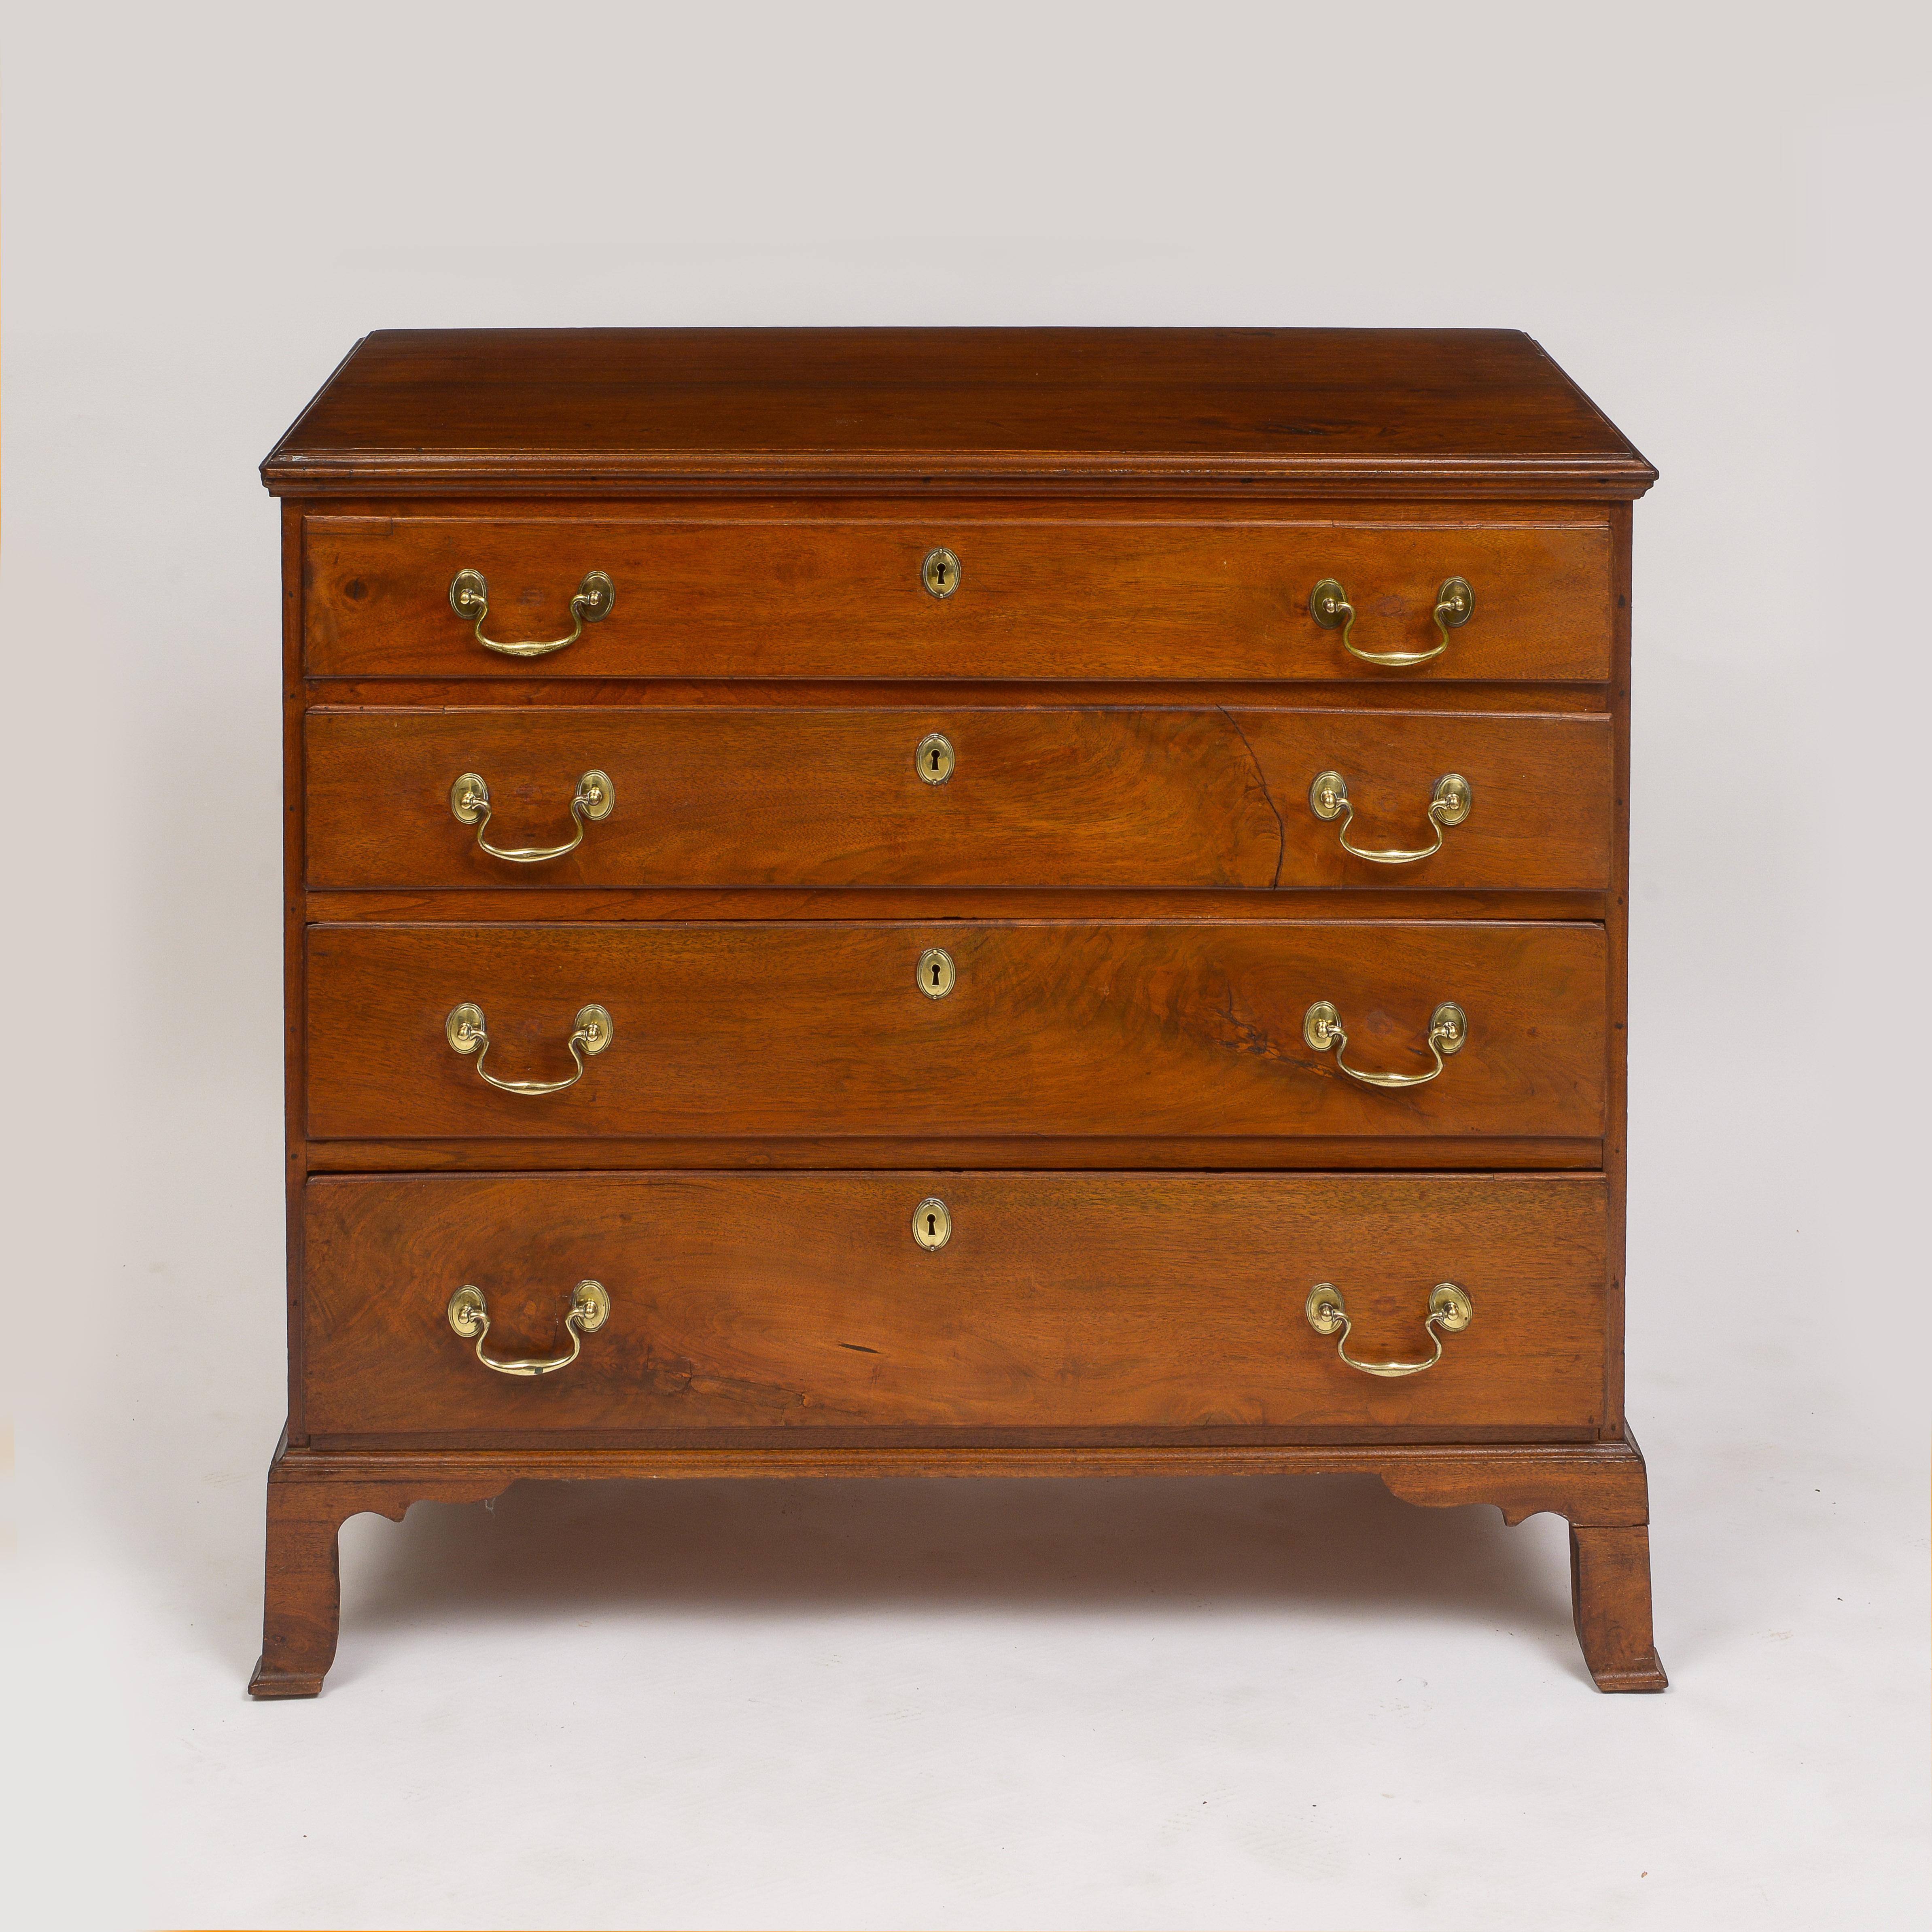 Well figured American walnut
Four drawer chest
Supported by high bracket feet
Early open bale brass hardware